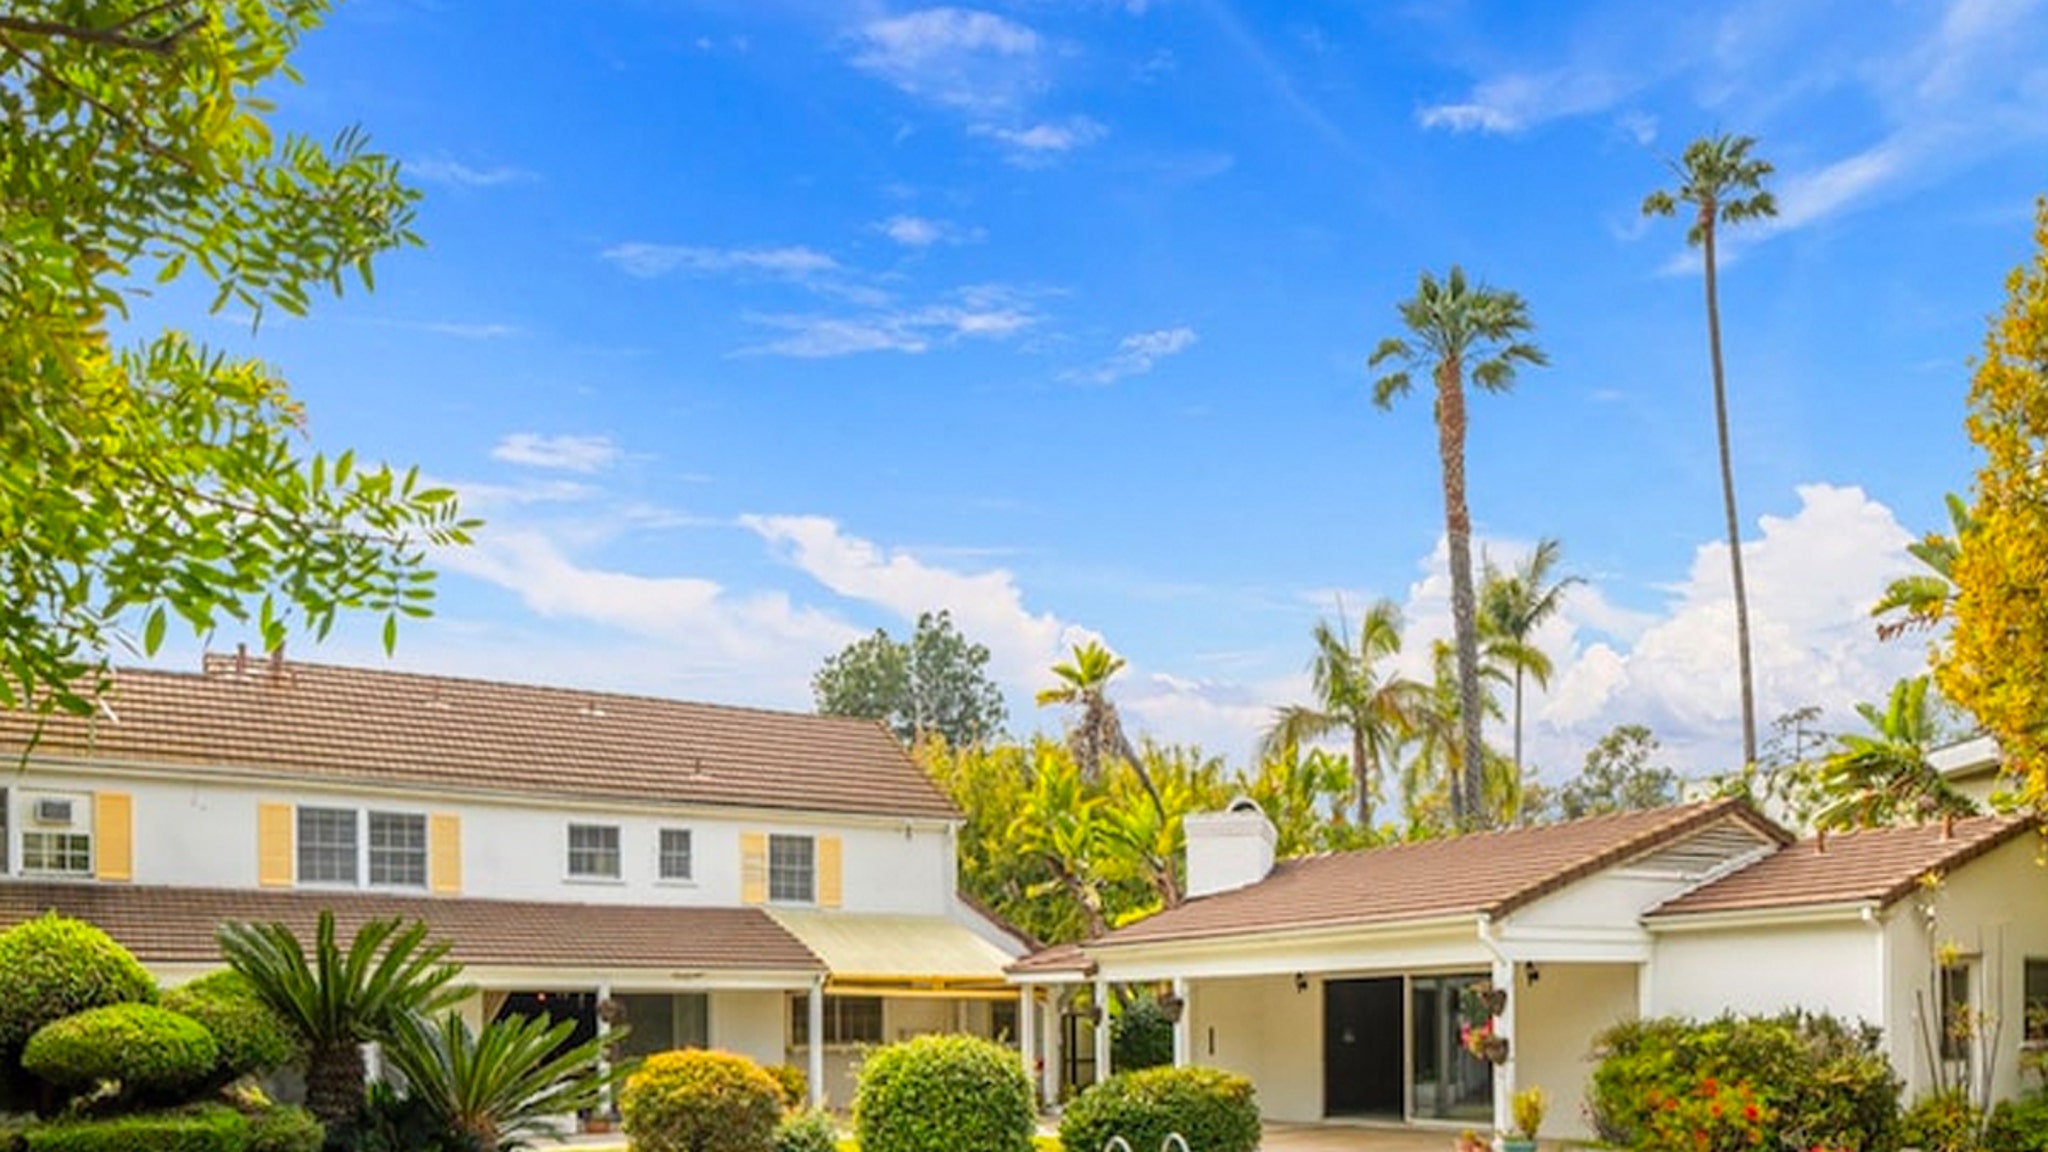 Betty White's Los Angeles Home Up For Sale